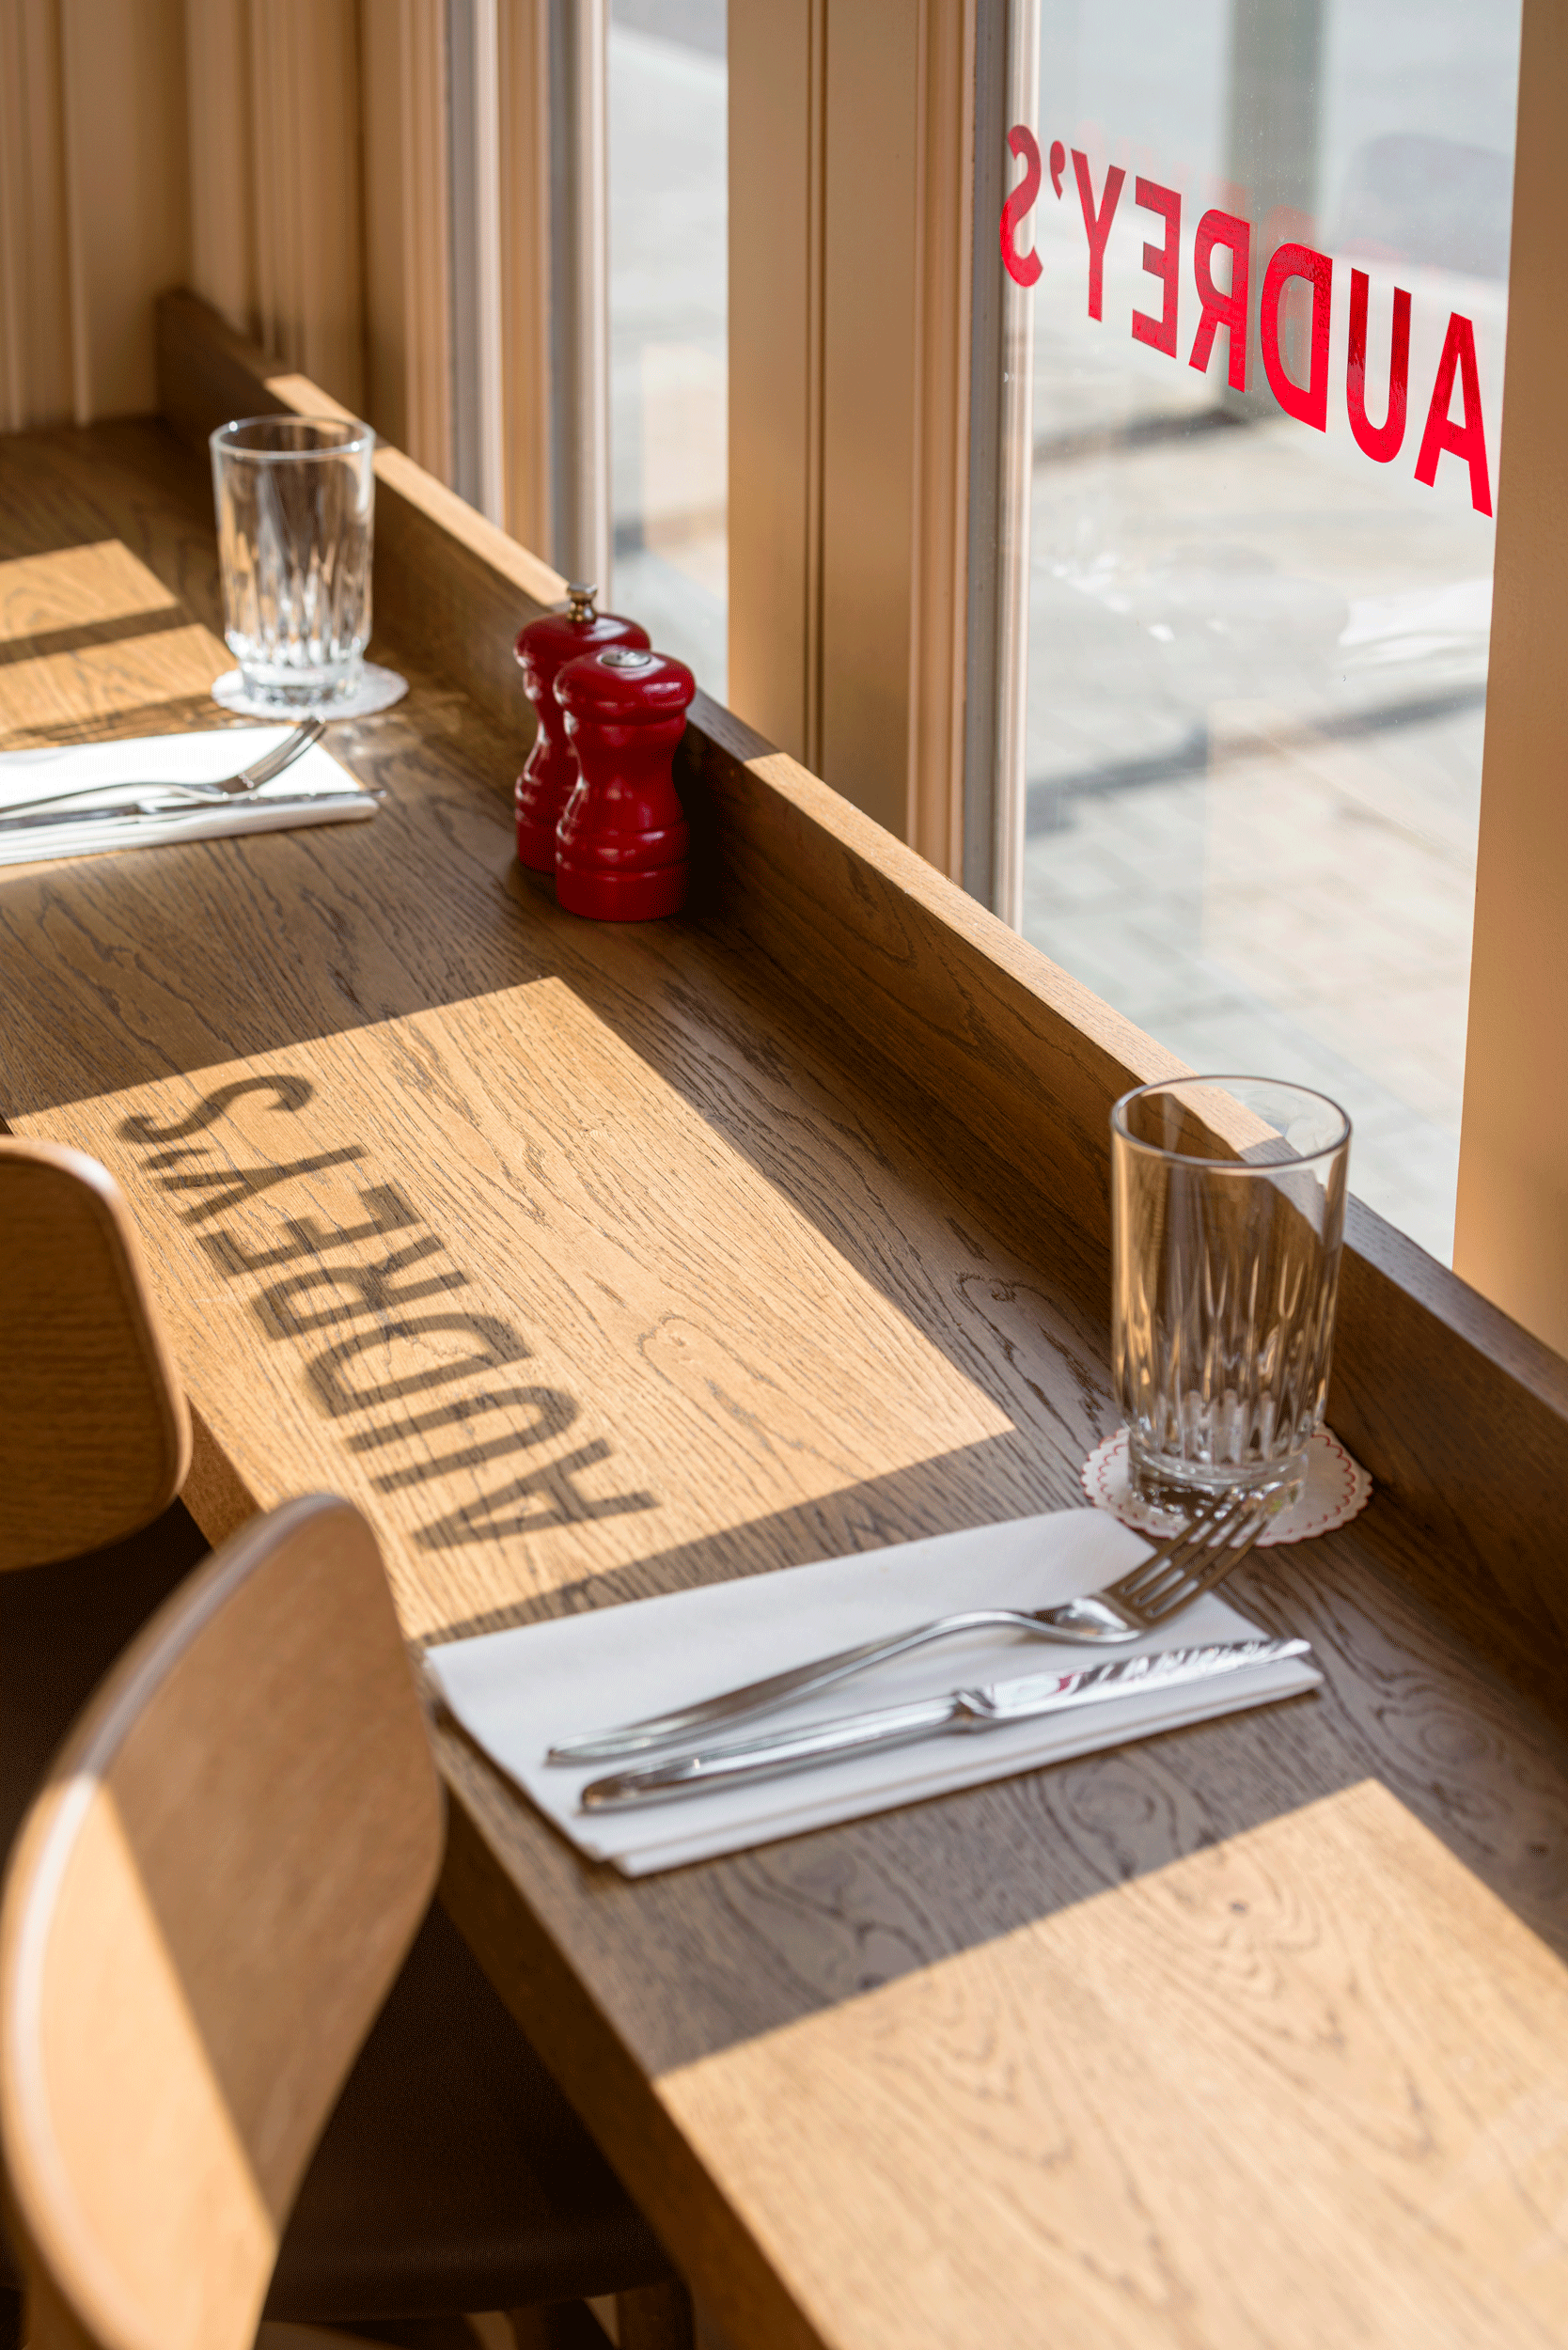 wooden table top Audrey's Cafe & Bar Borough modern and retro restaurant designed by 3Stories Interior Design and branding creative agency London, cosy and unpretencious interior